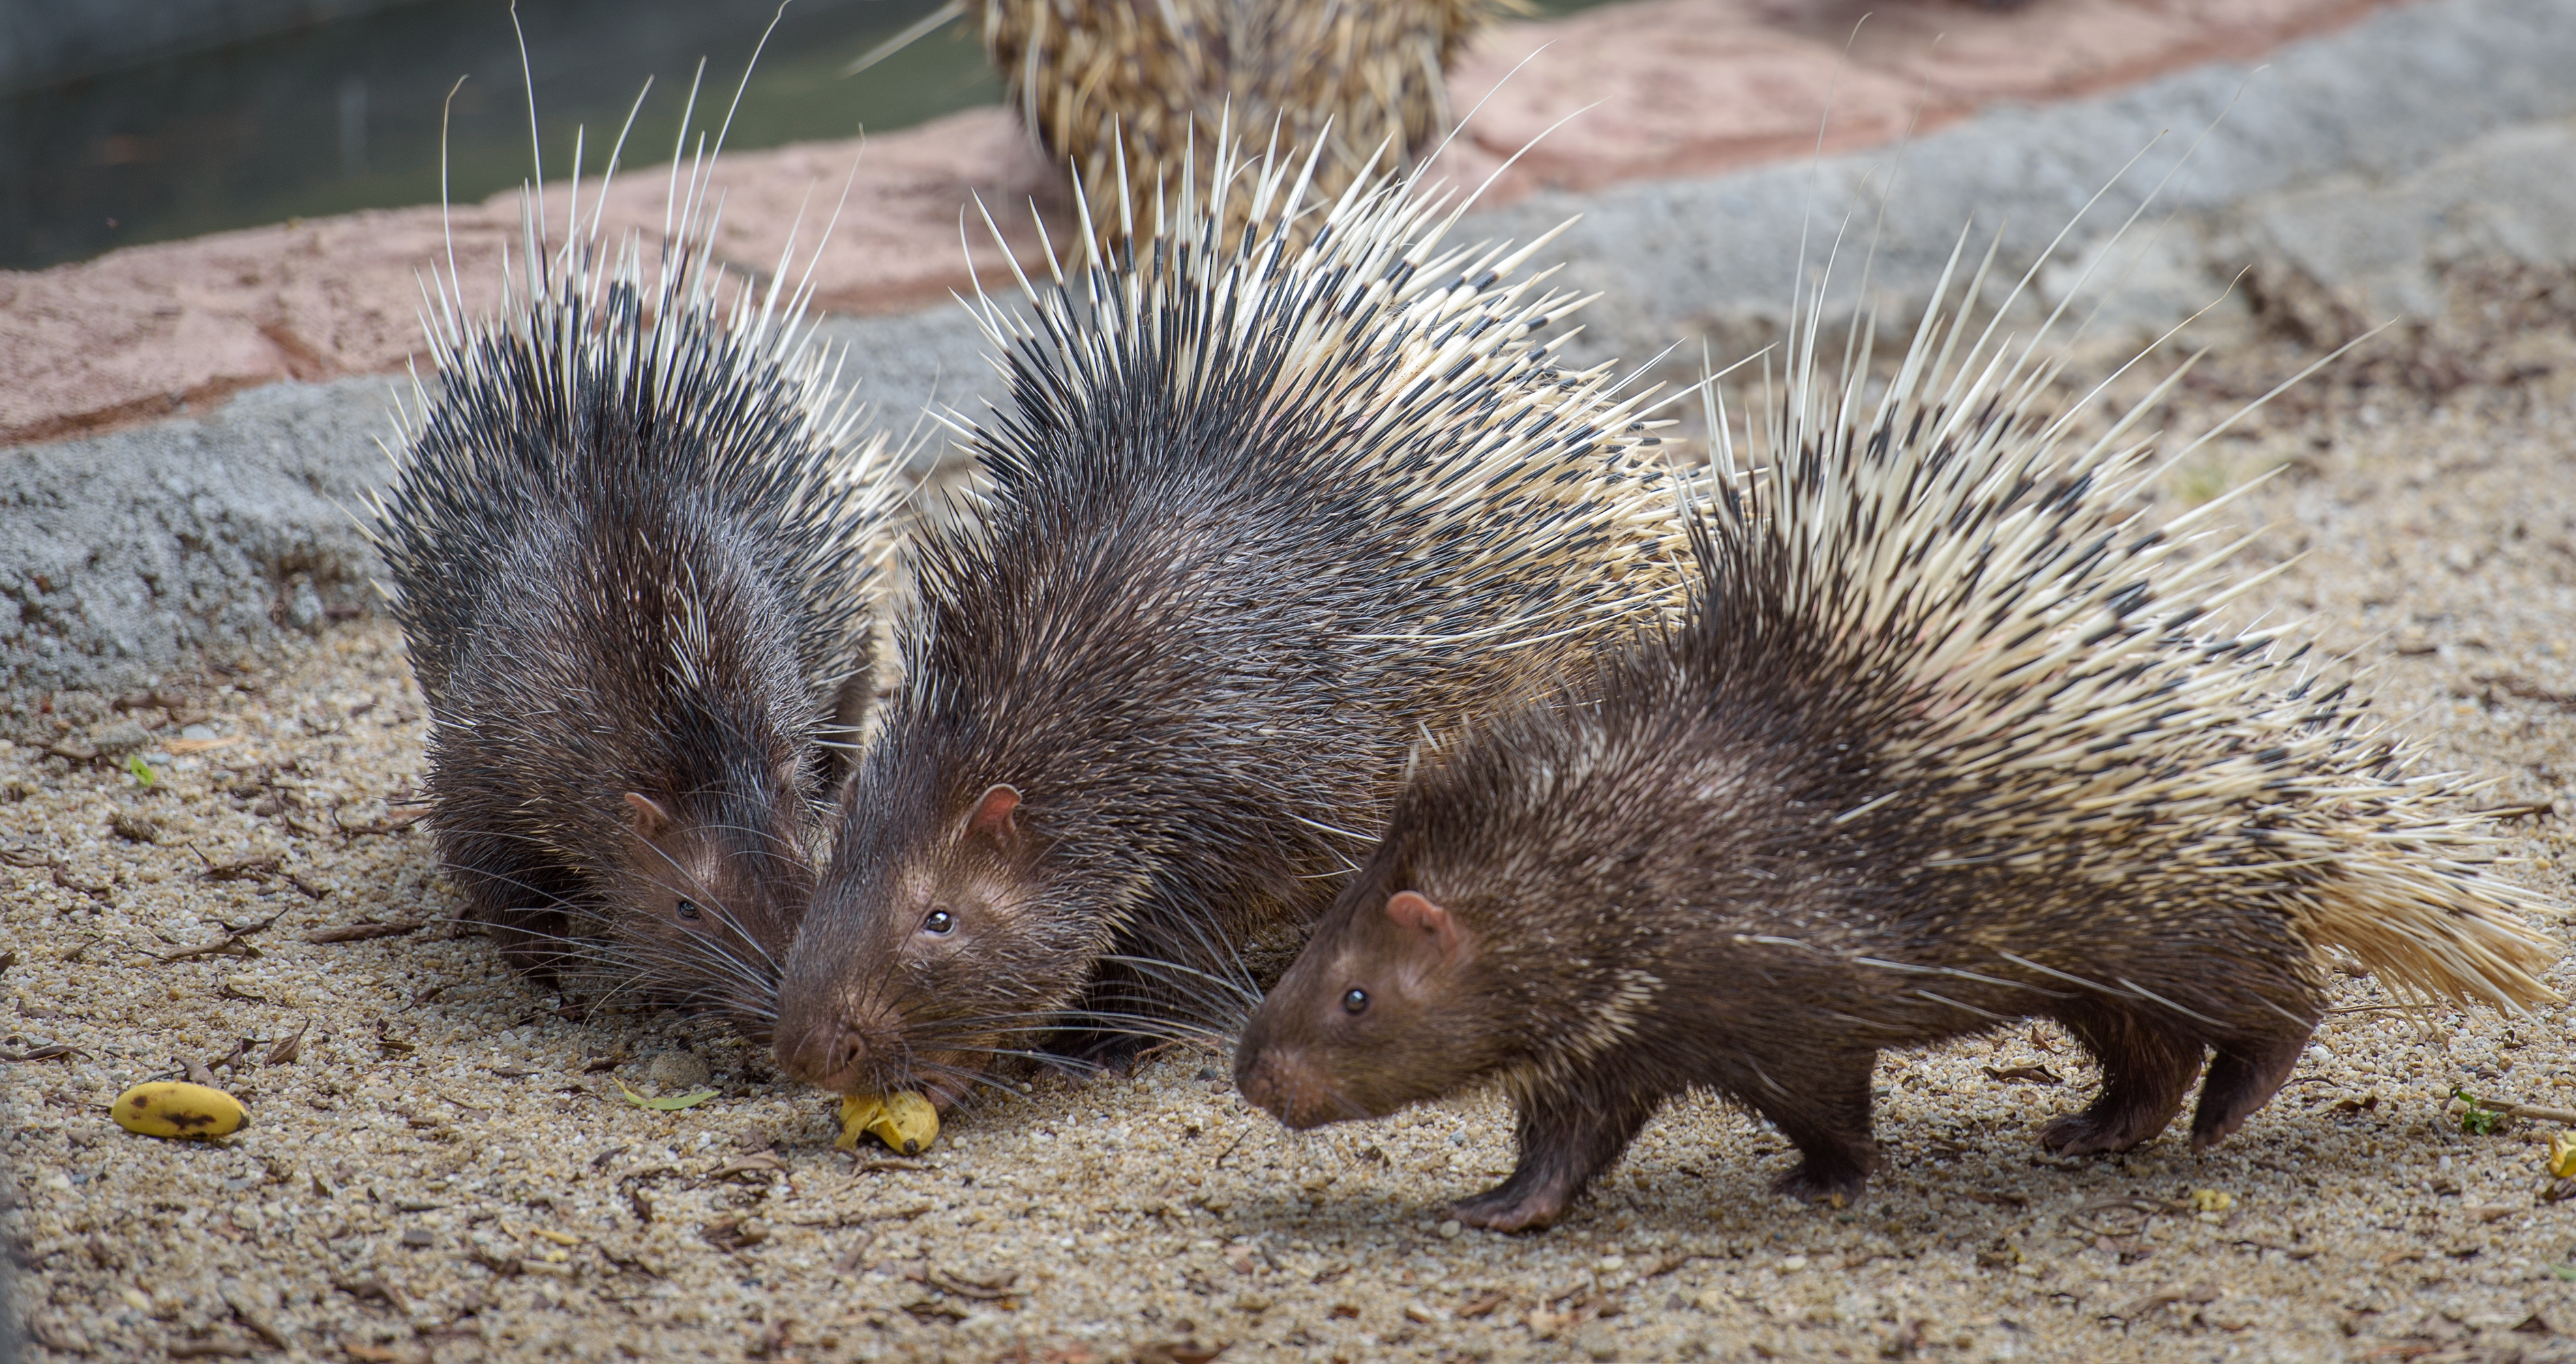 Two porcupines by a water edge, one eating